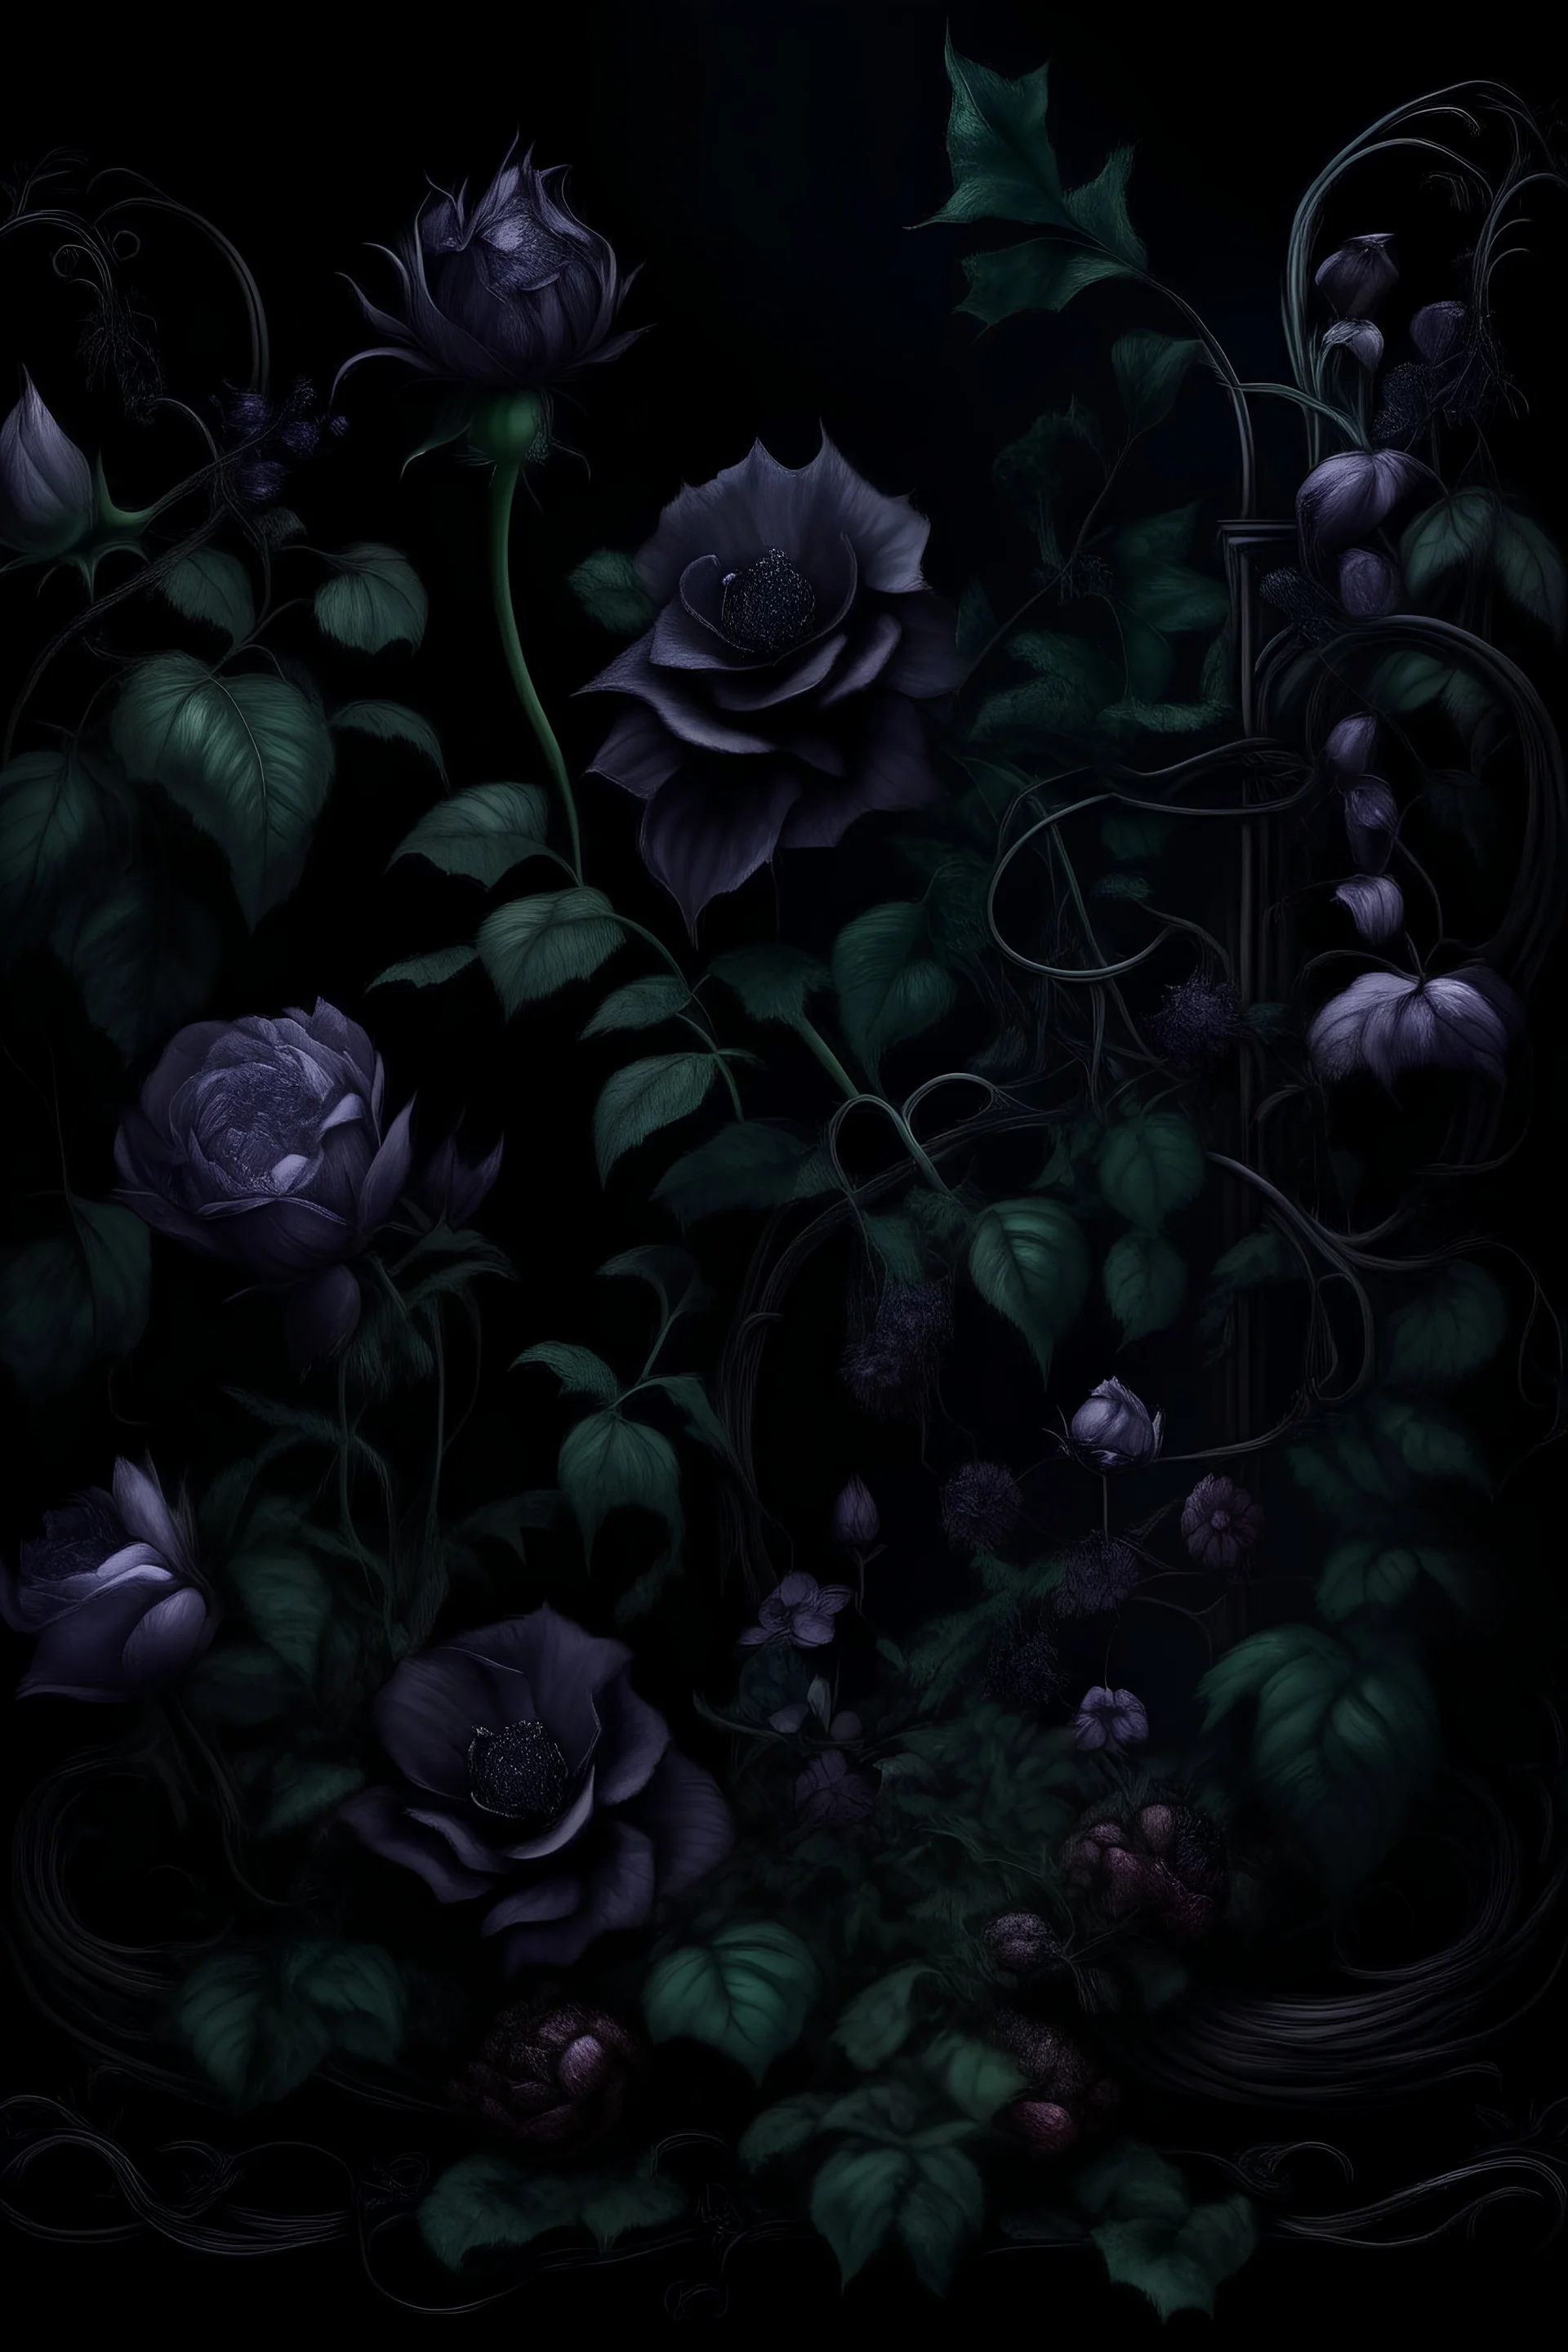 dark garden with grapevines, occult, darkness, purple flowers and black roses